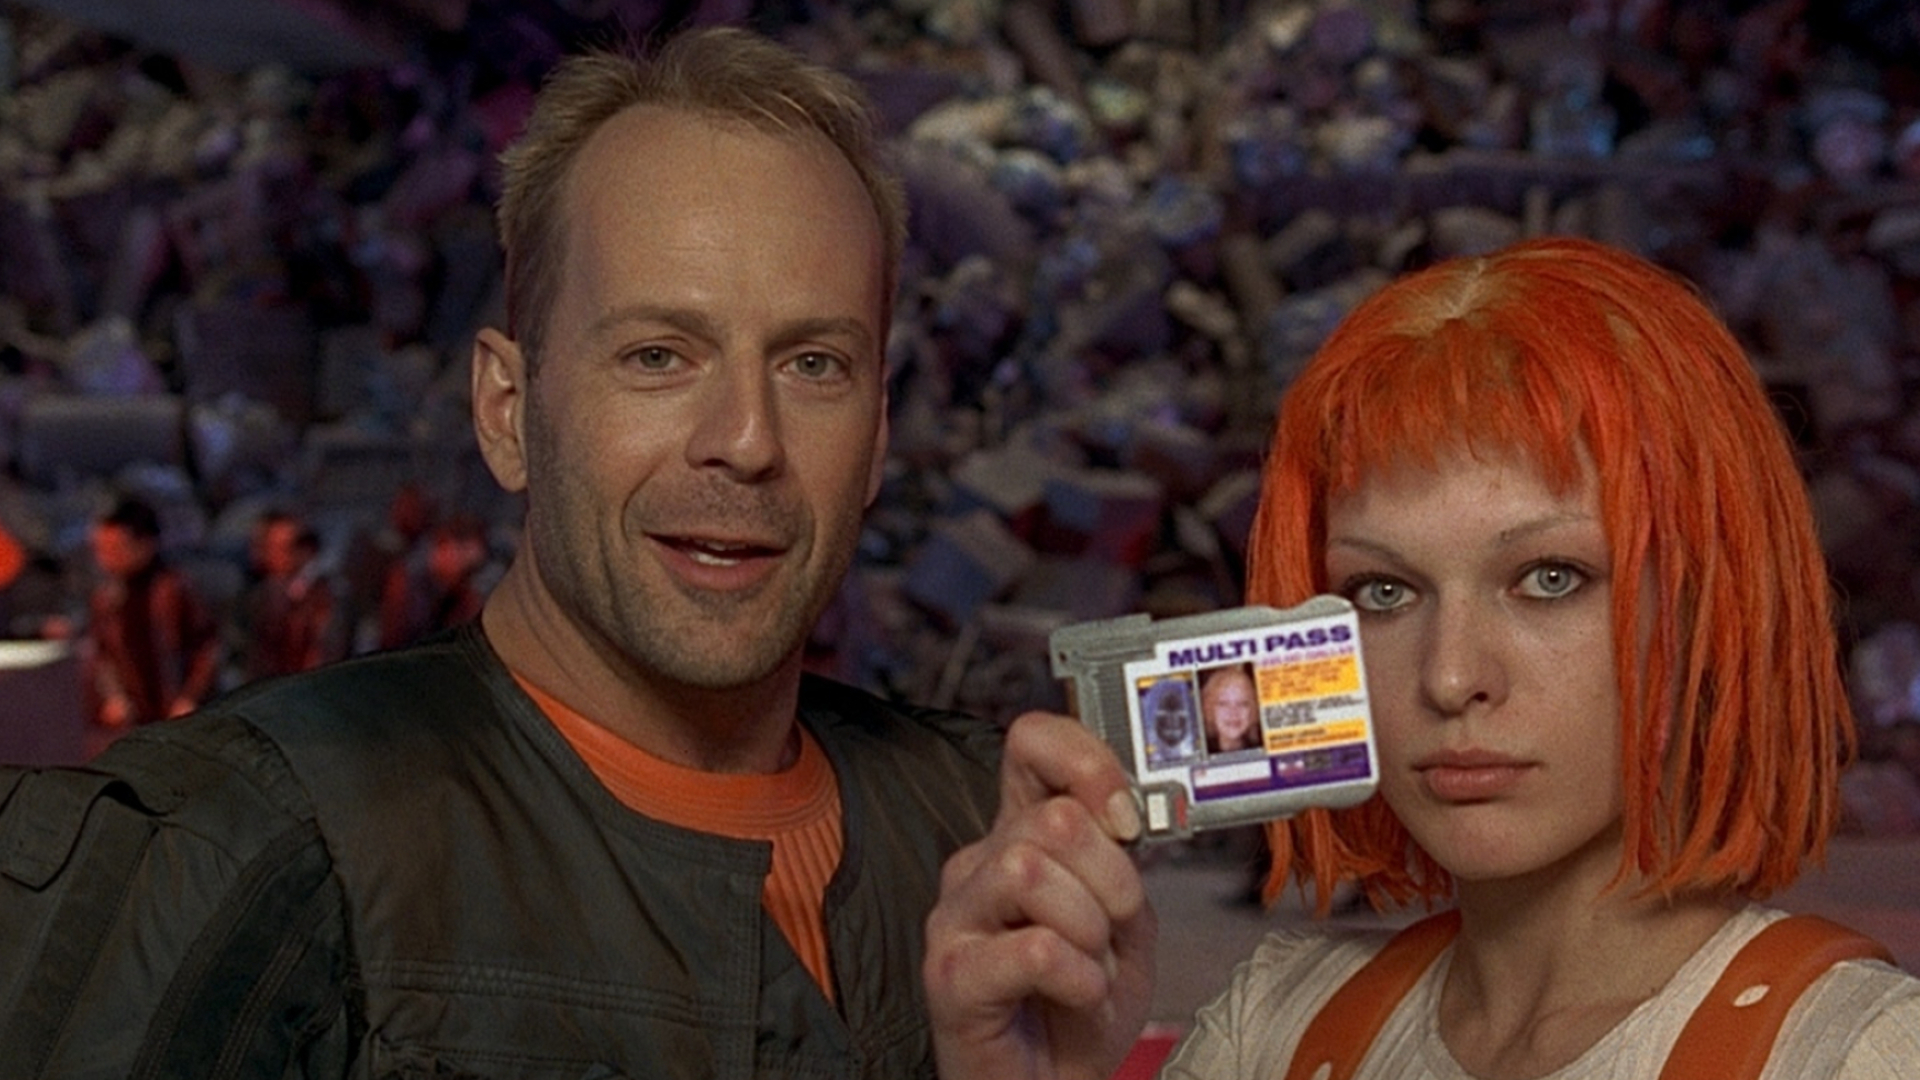 Bruce Willis, The Fifth Element, Multipass, Iconic movies, 1920x1080 Full HD Desktop